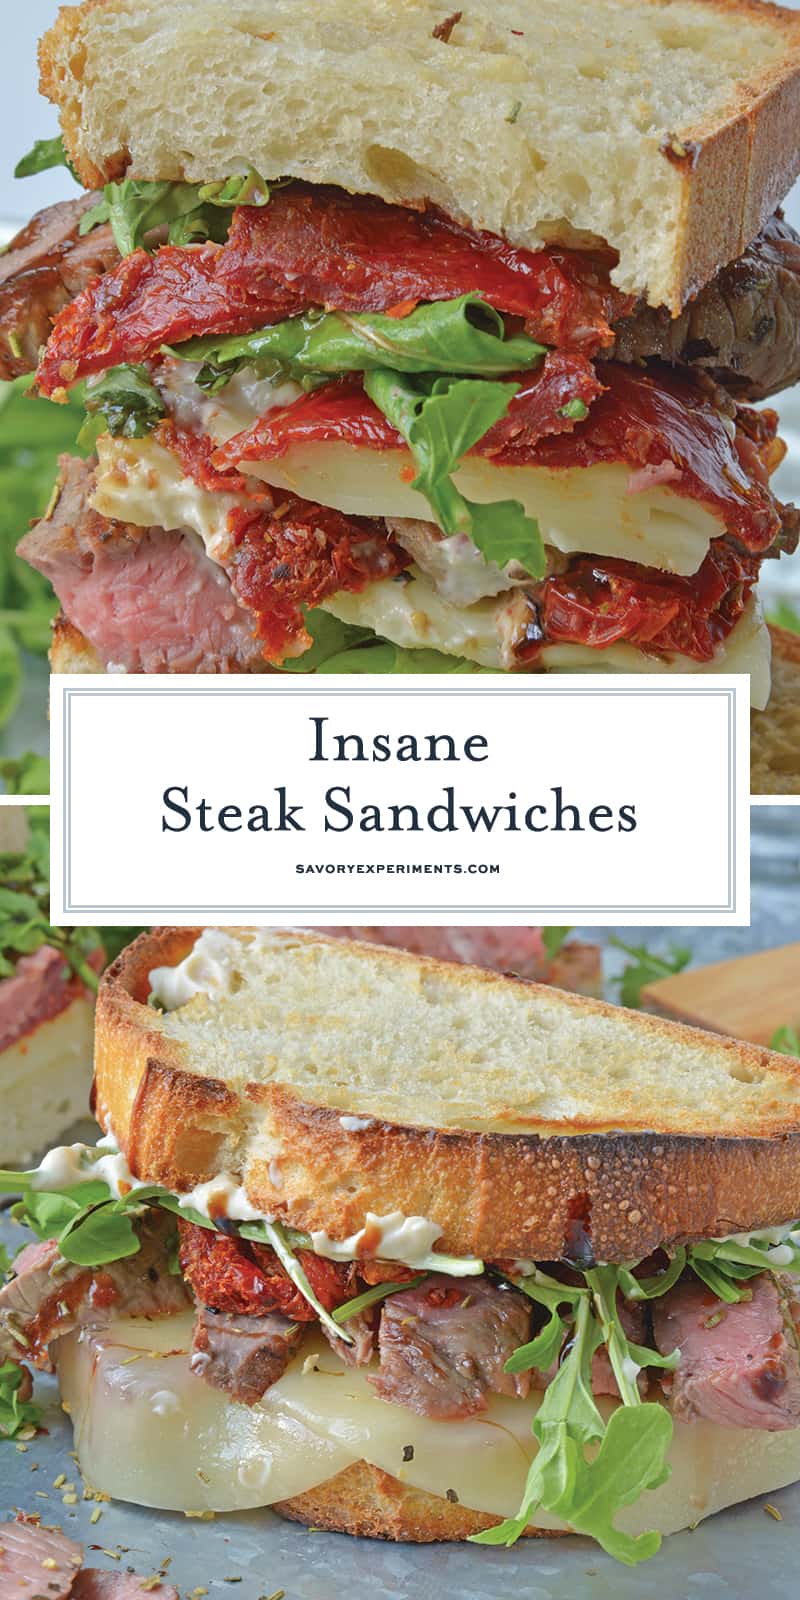 Insane Steak Sandwiches are gourmet sandwiches, seasoned to perfection with zesty Italian herbs and toppings. The best steak sandwich recipe ever! #steaksandwiches #gourmetsandwiches www.savoryexperiments.com 